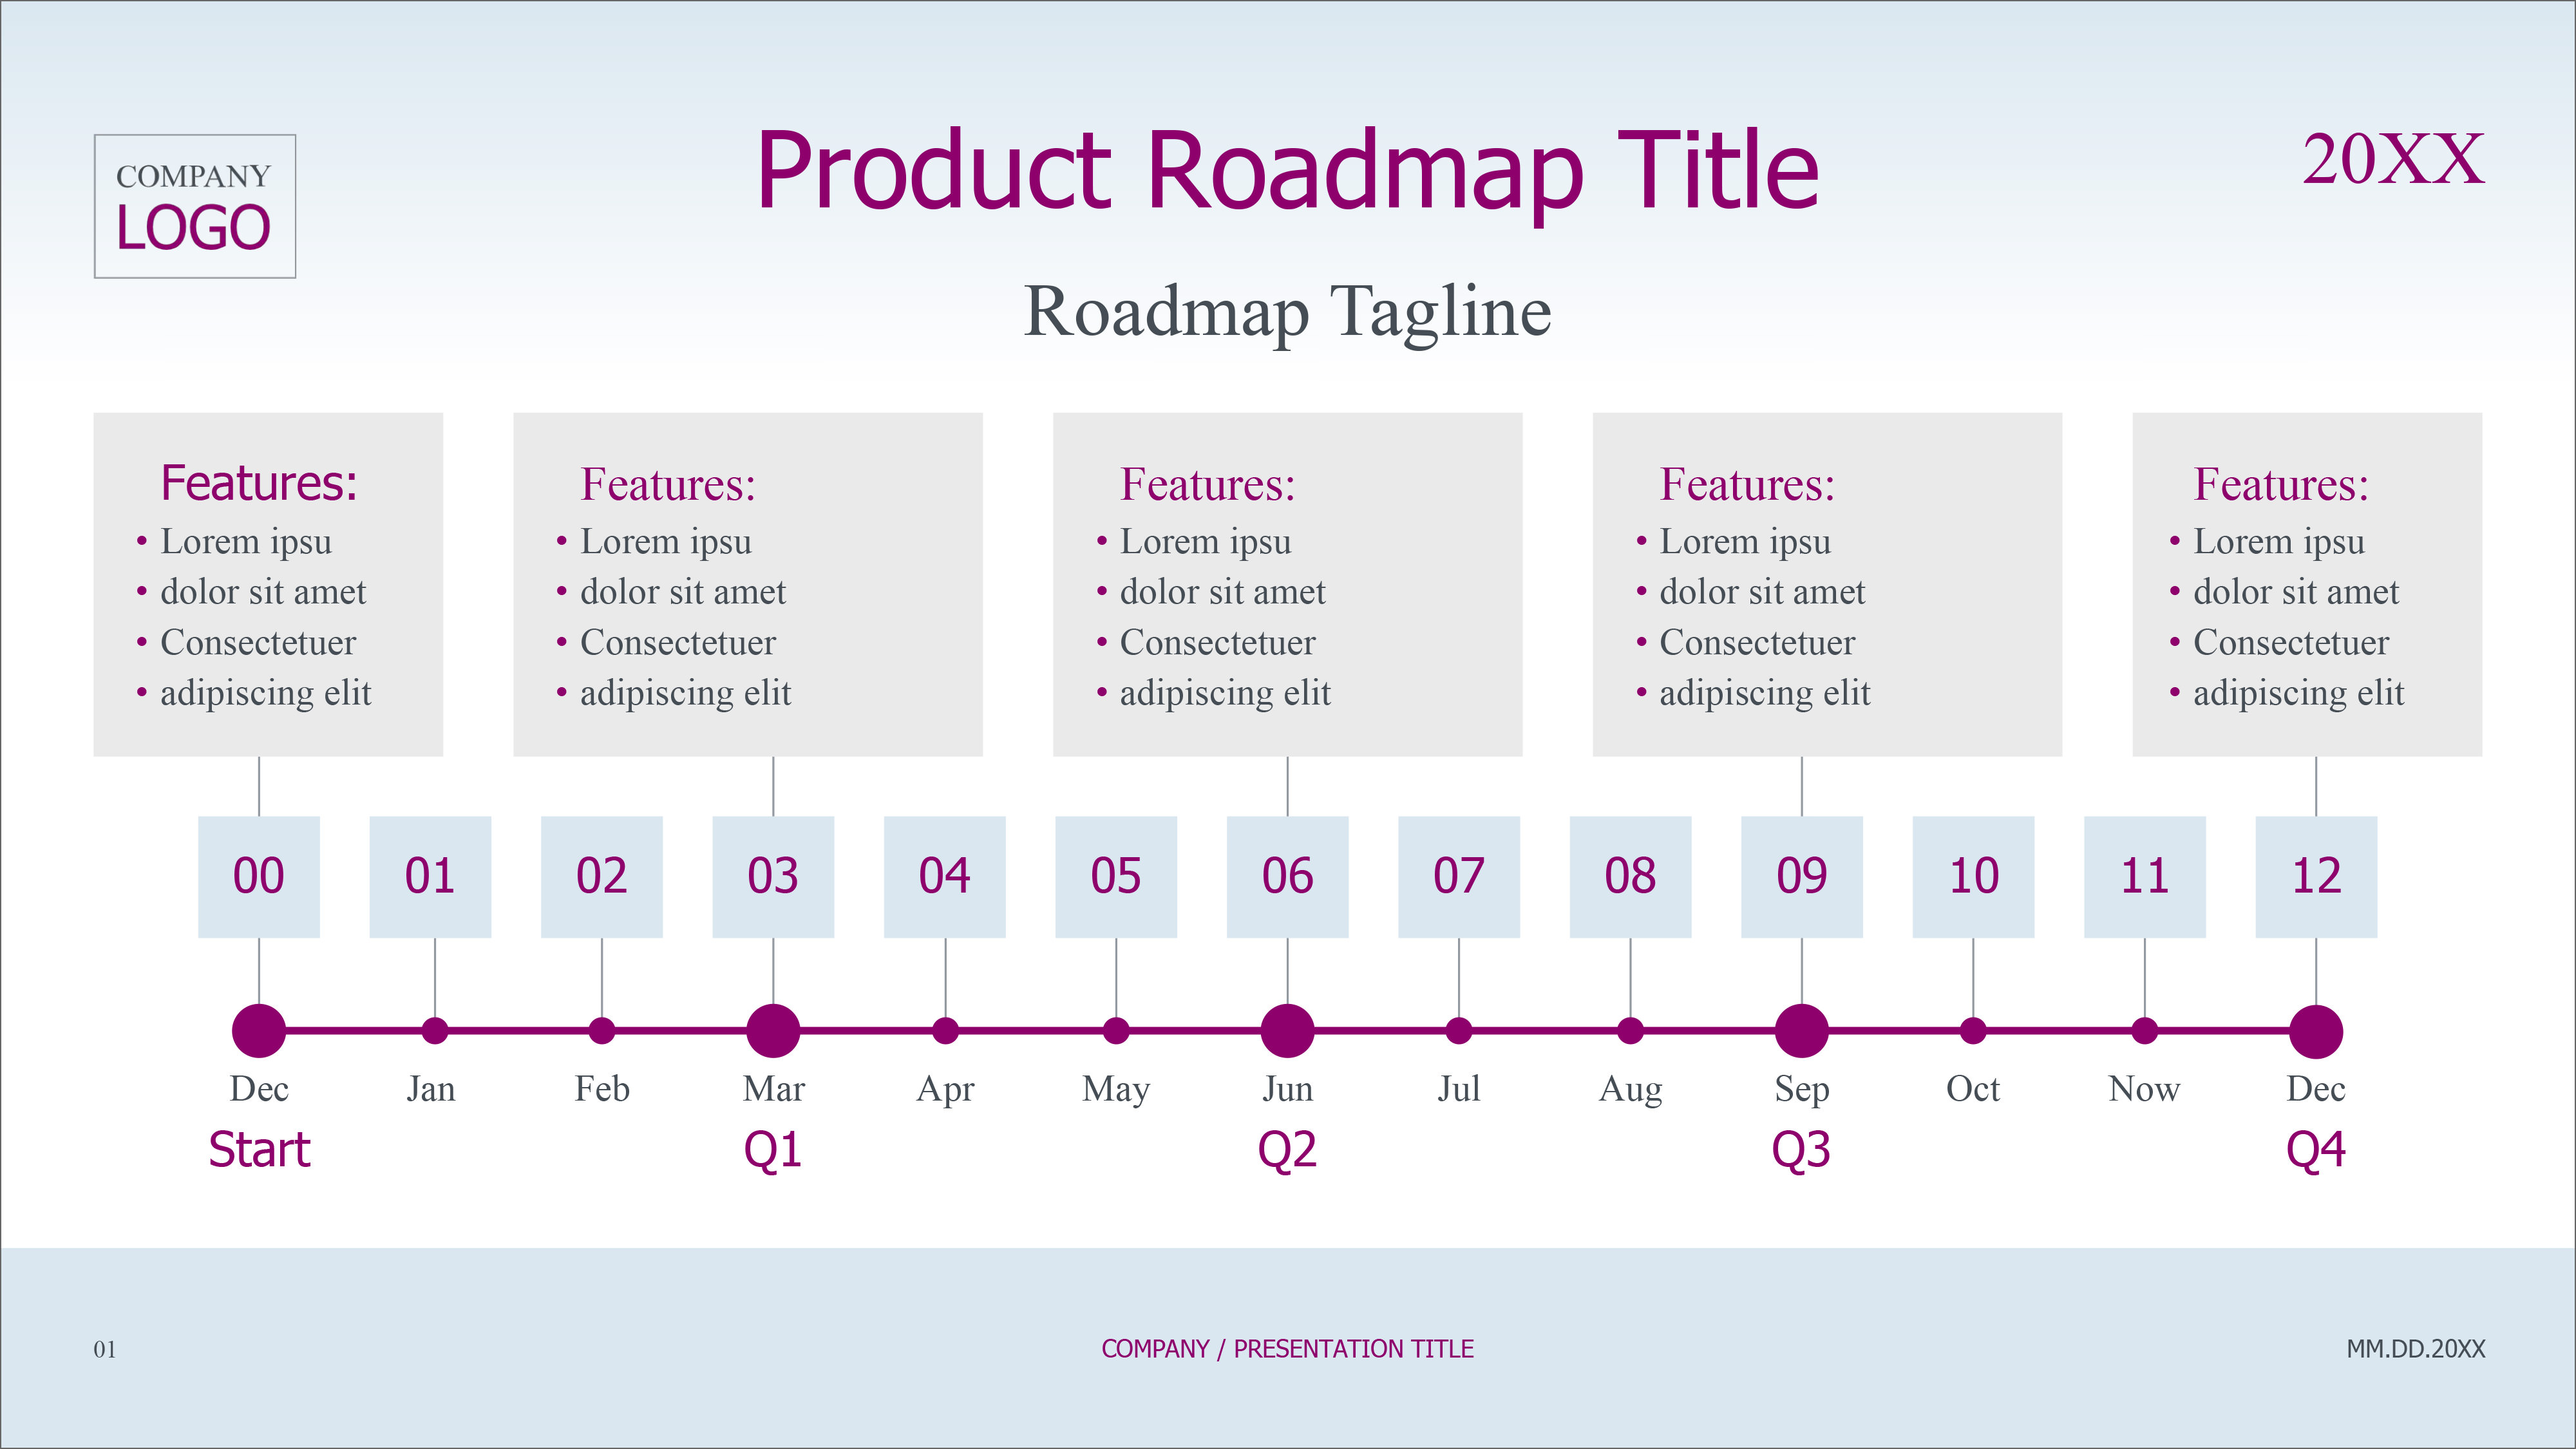 Excel Project Timeline Template Download calllaxen